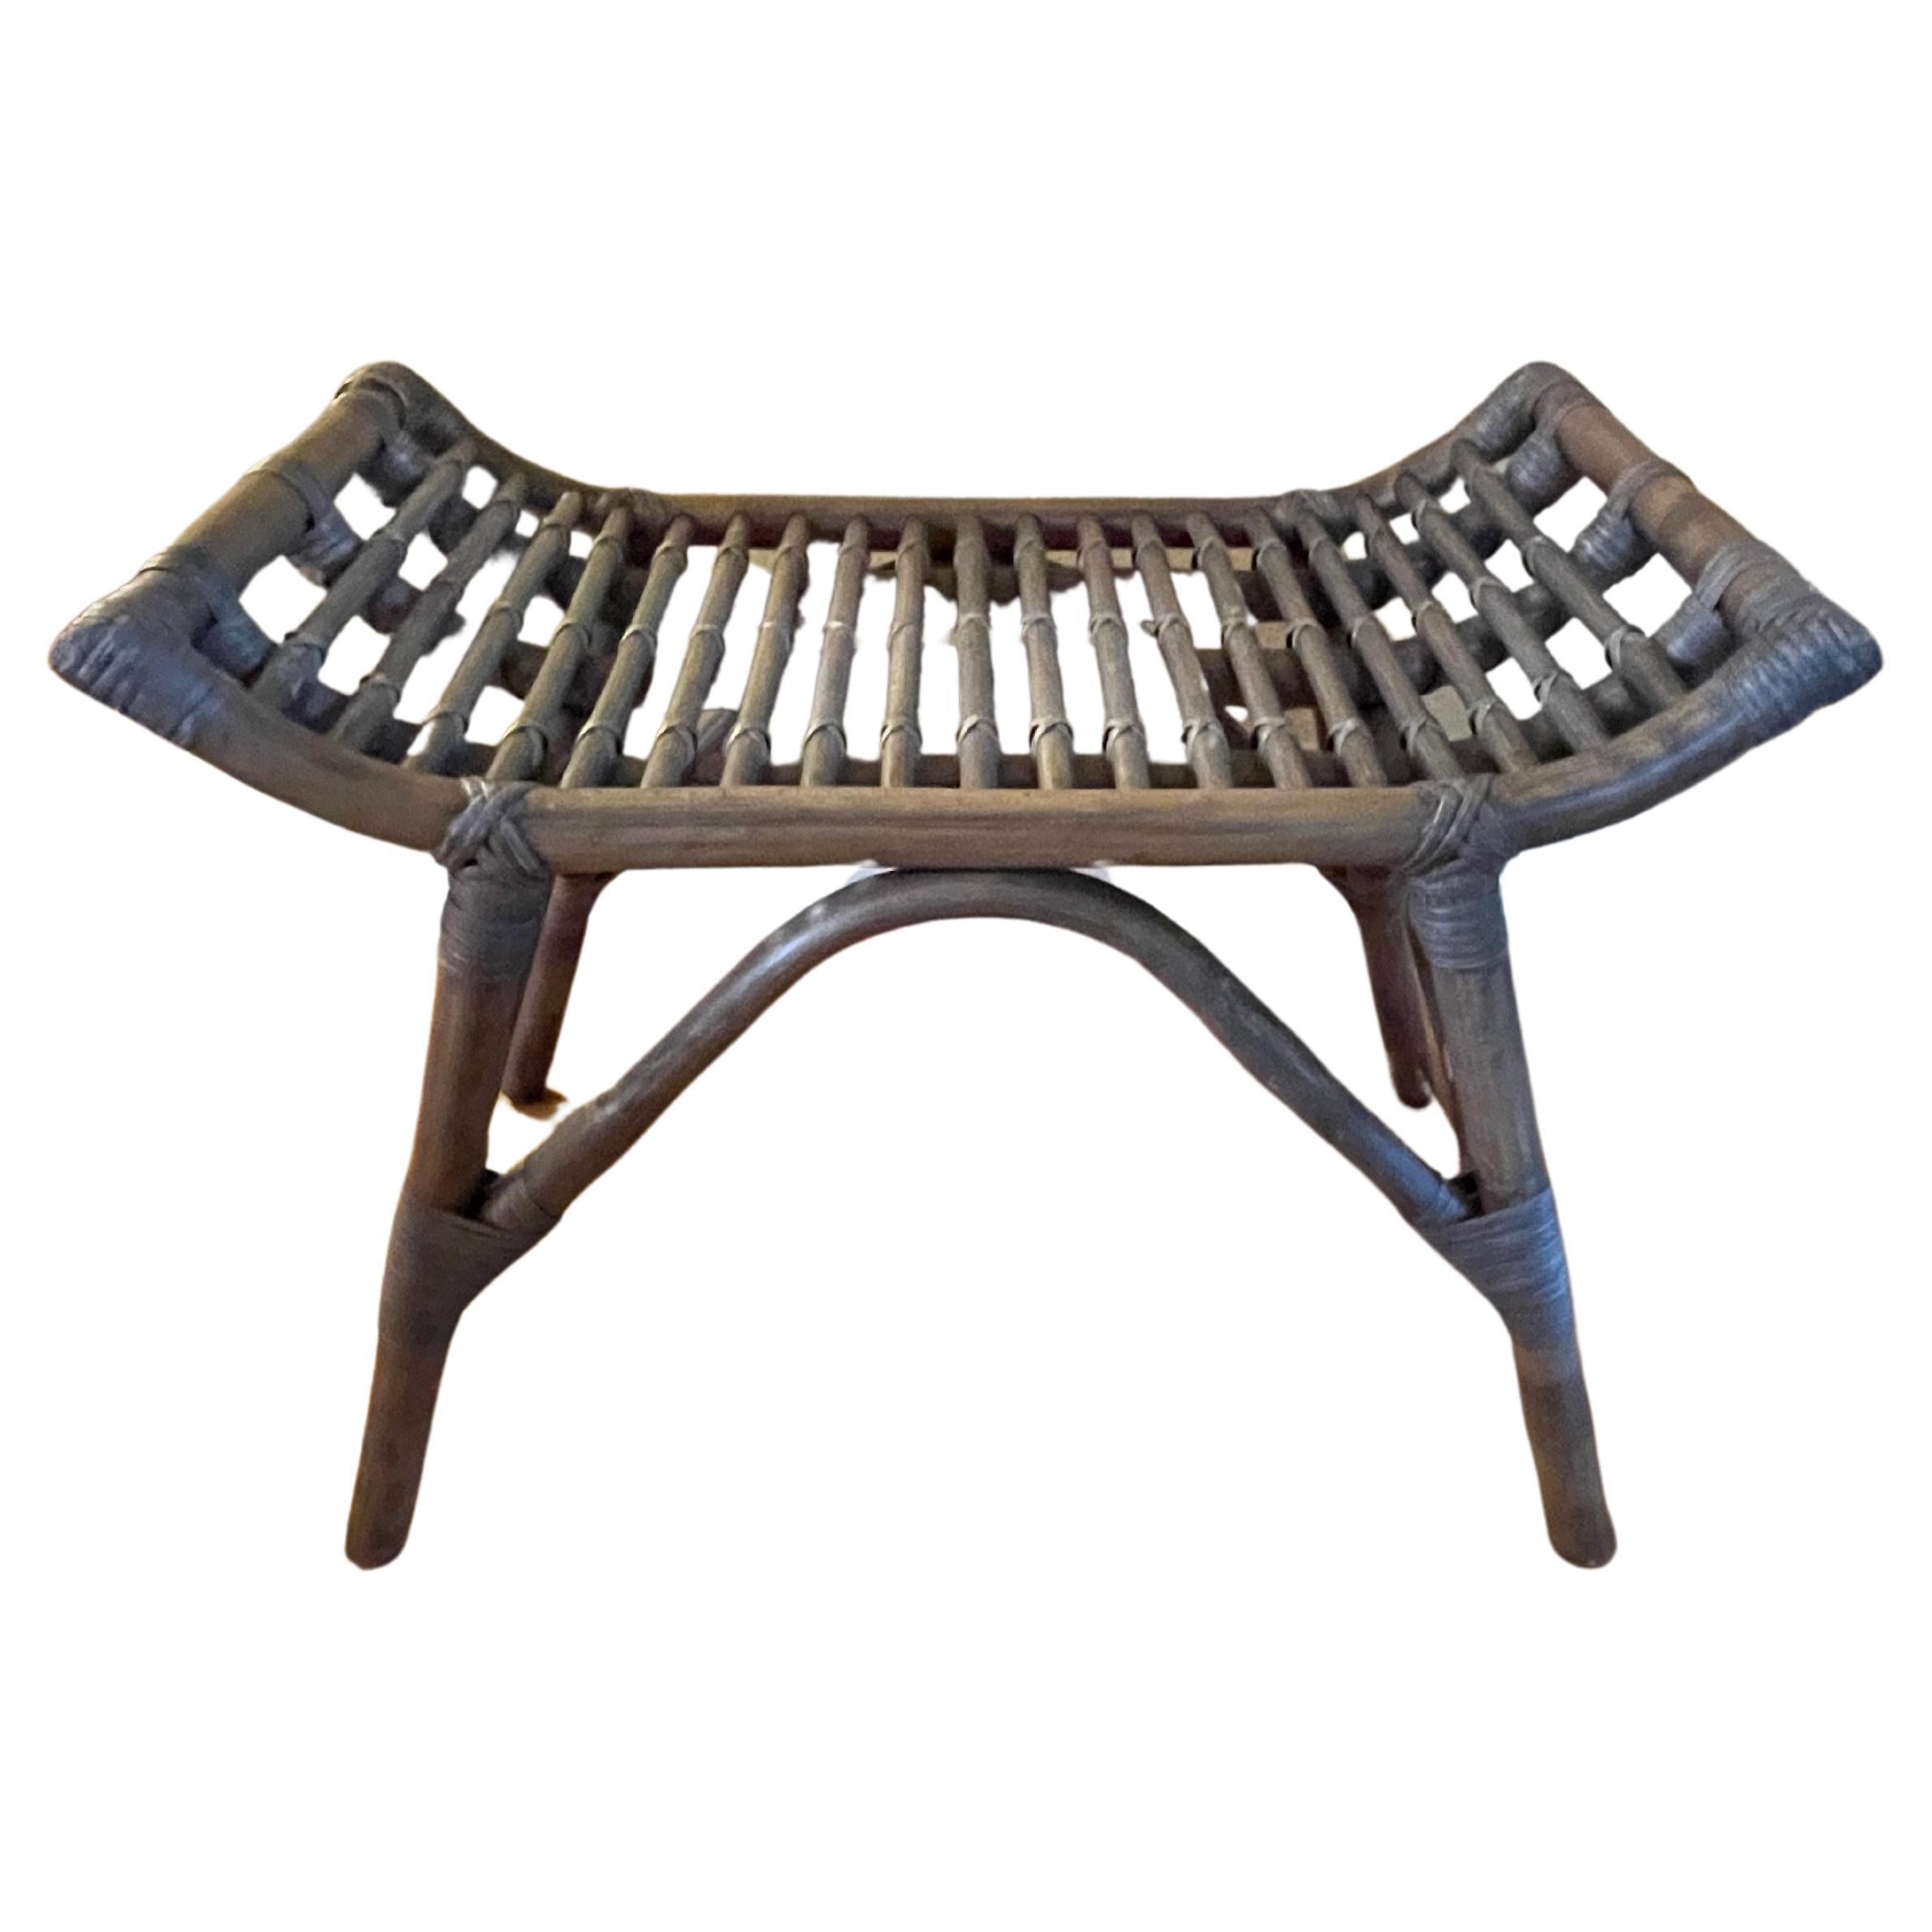 Driftwood-Color Rattan and Bamboo Bench or Footstool